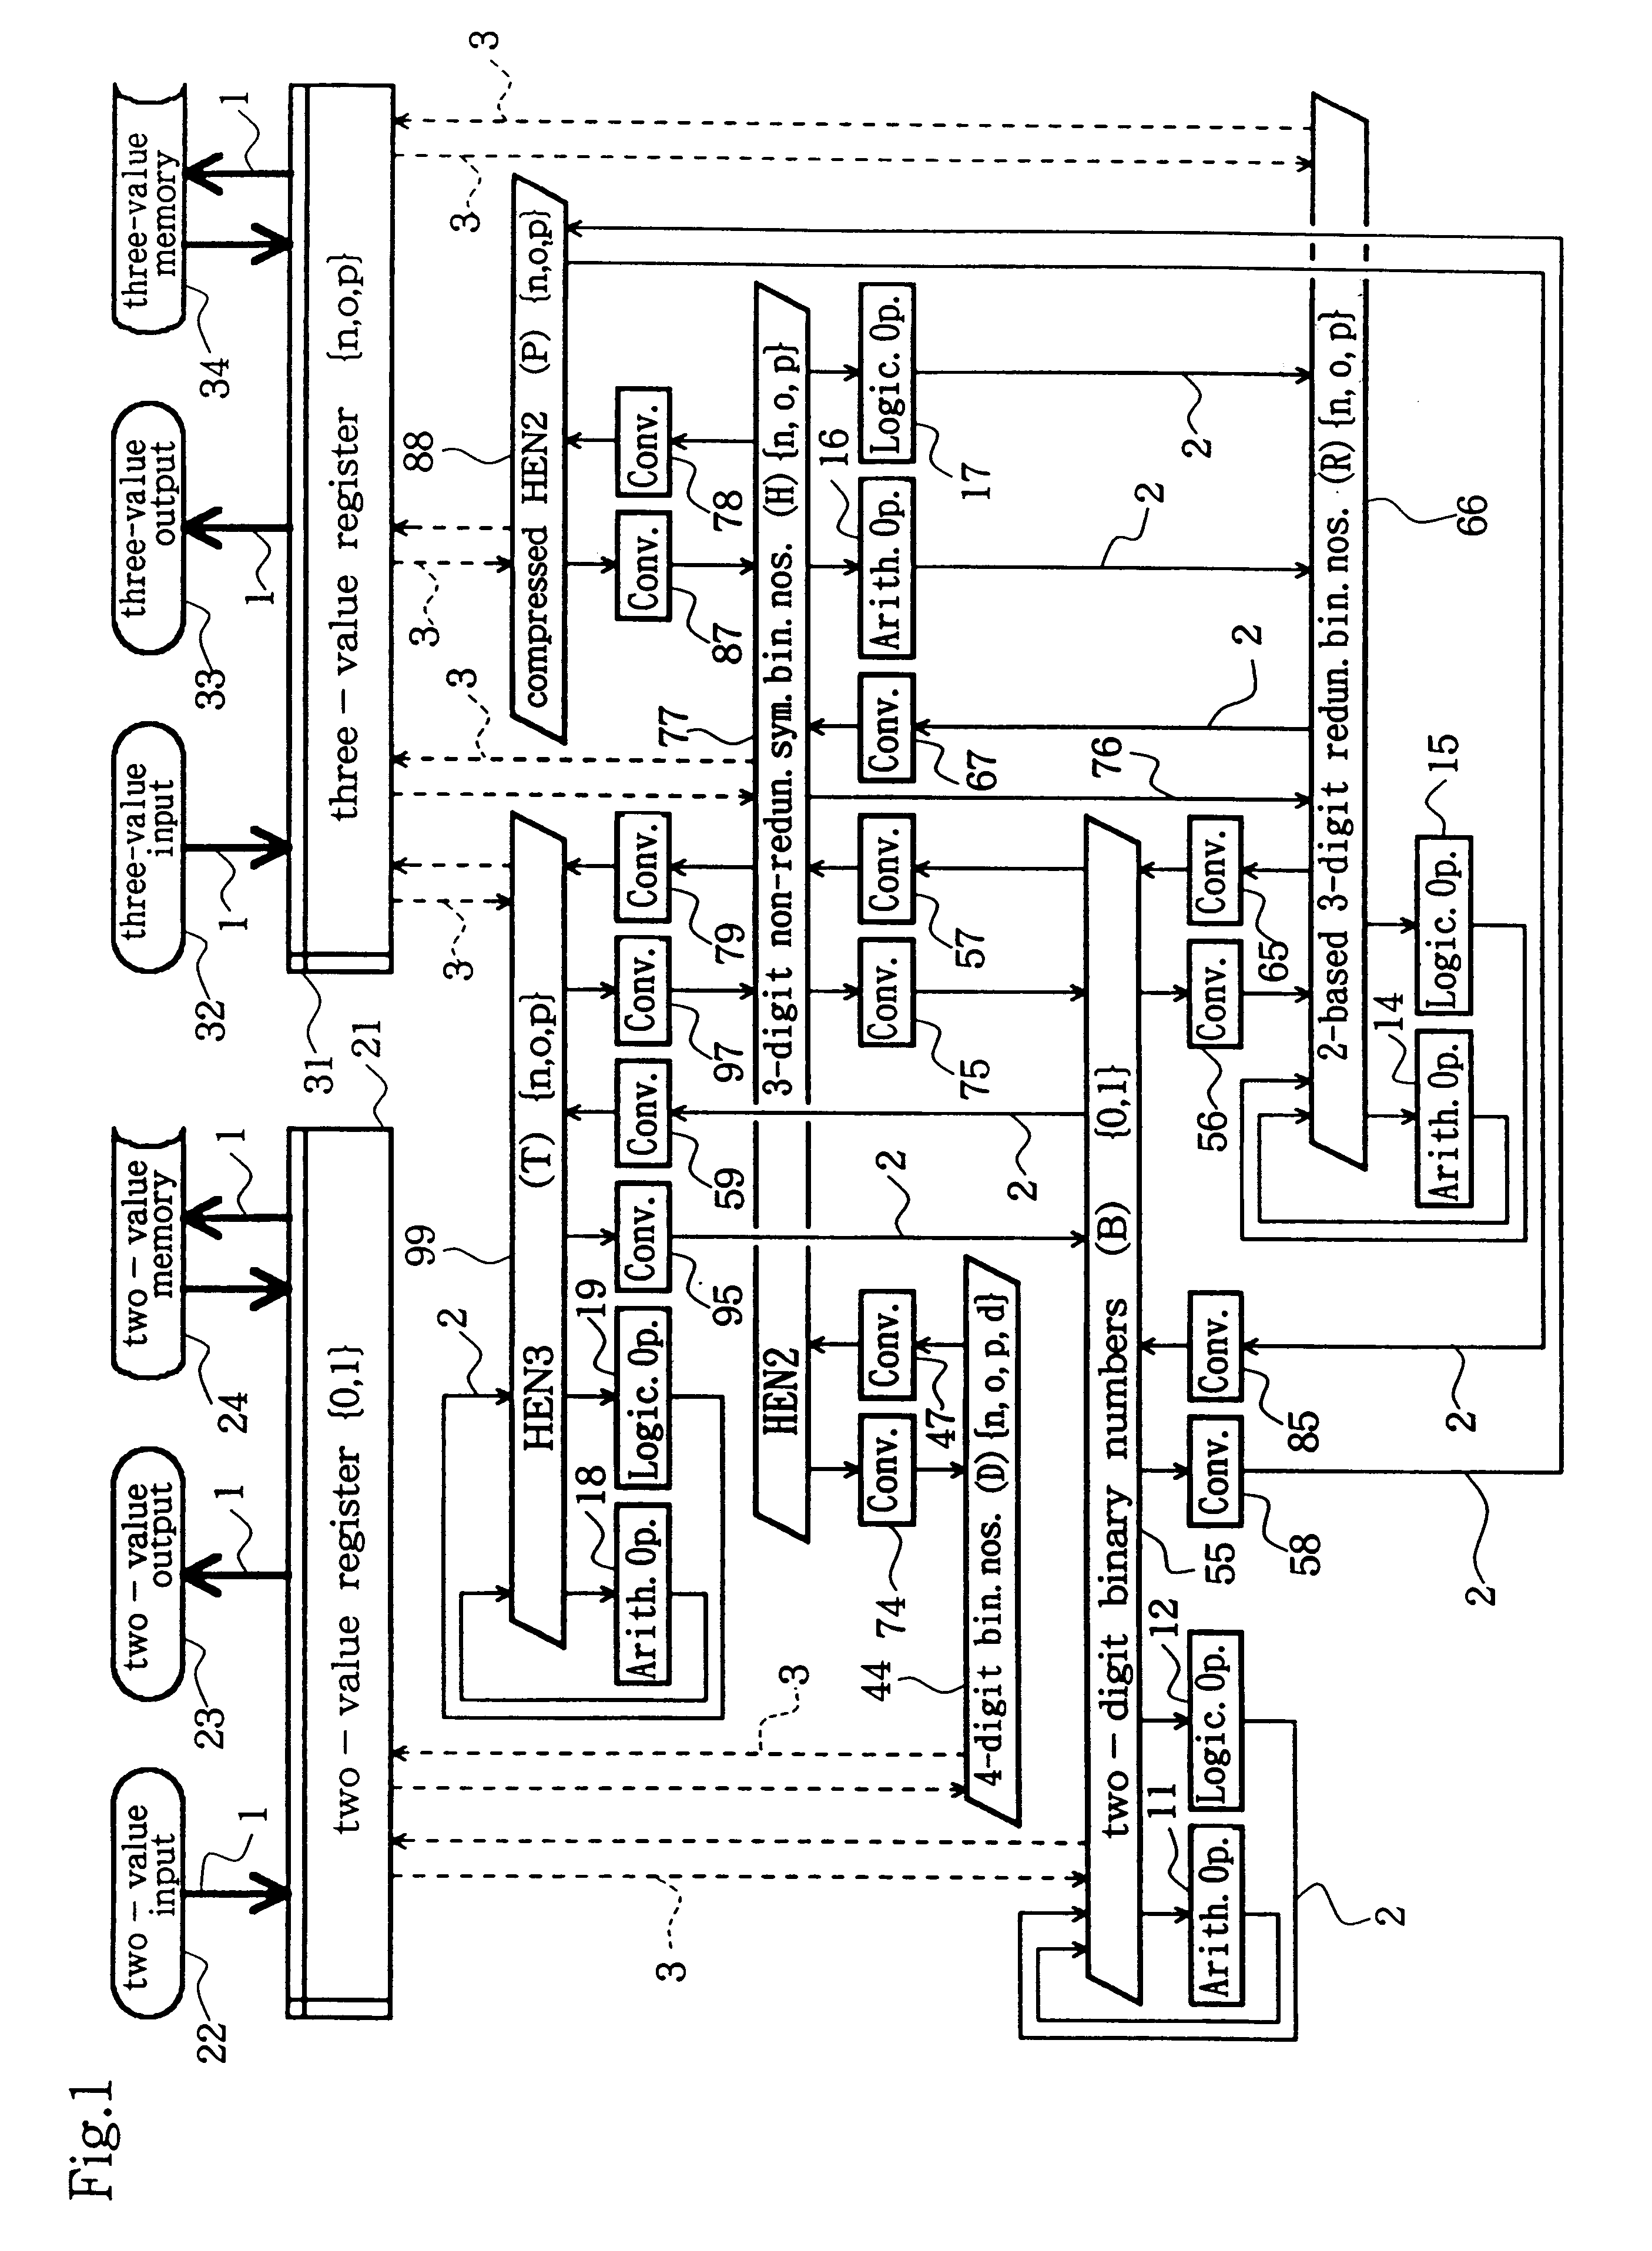 Reproducible data conversion and/or compression method of digital signals and a data converter and a digital computer